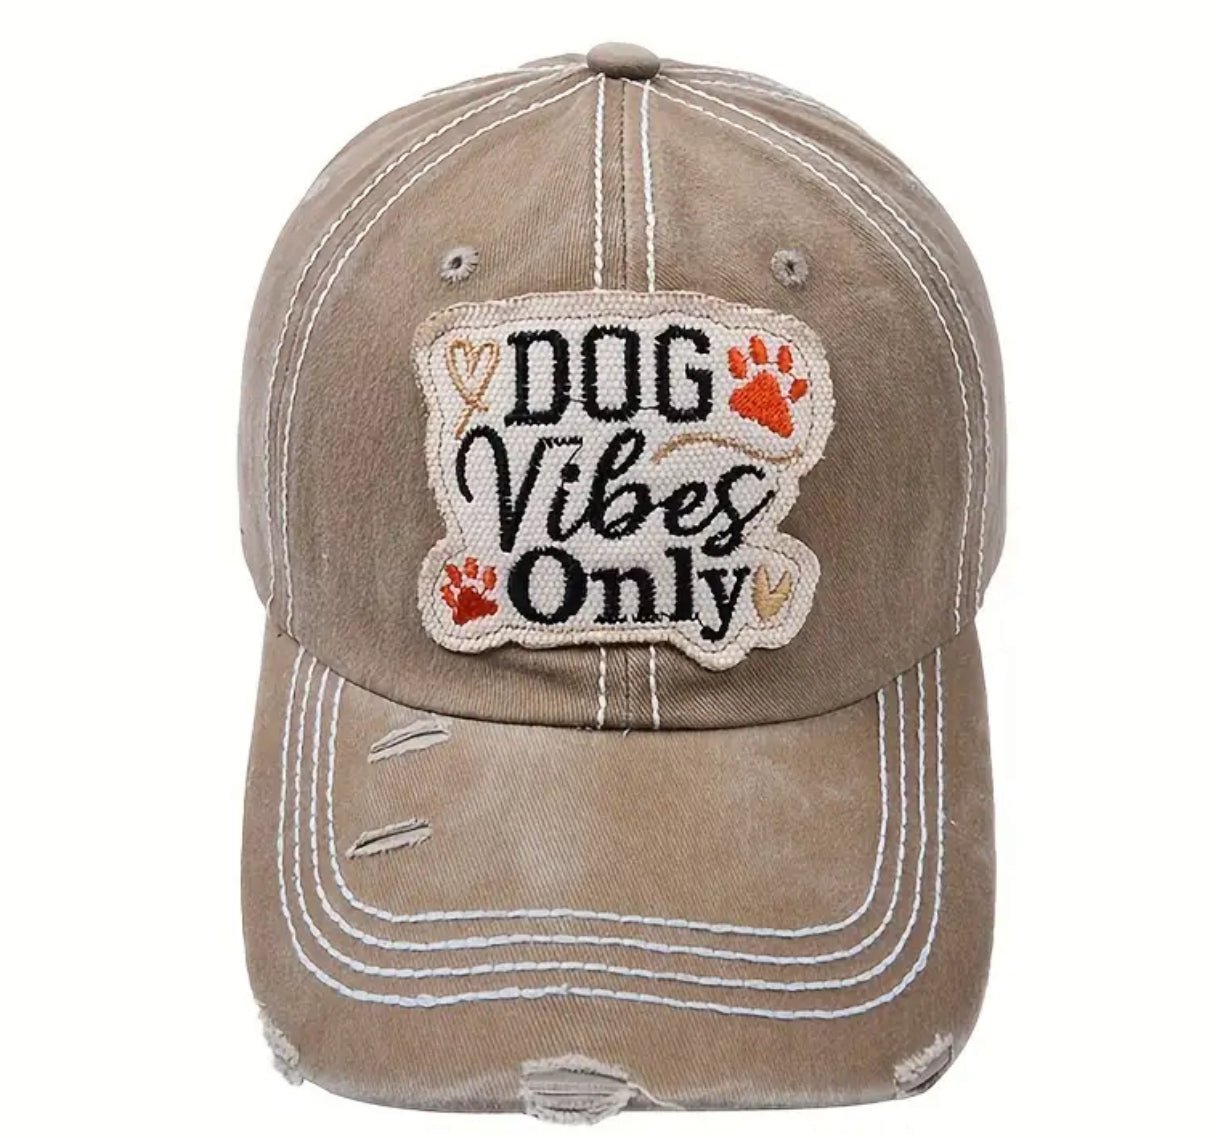 Solid Color Adjustable Baseball Cap DOG VIBES Only Slogan Patch Hat Washed Distressed